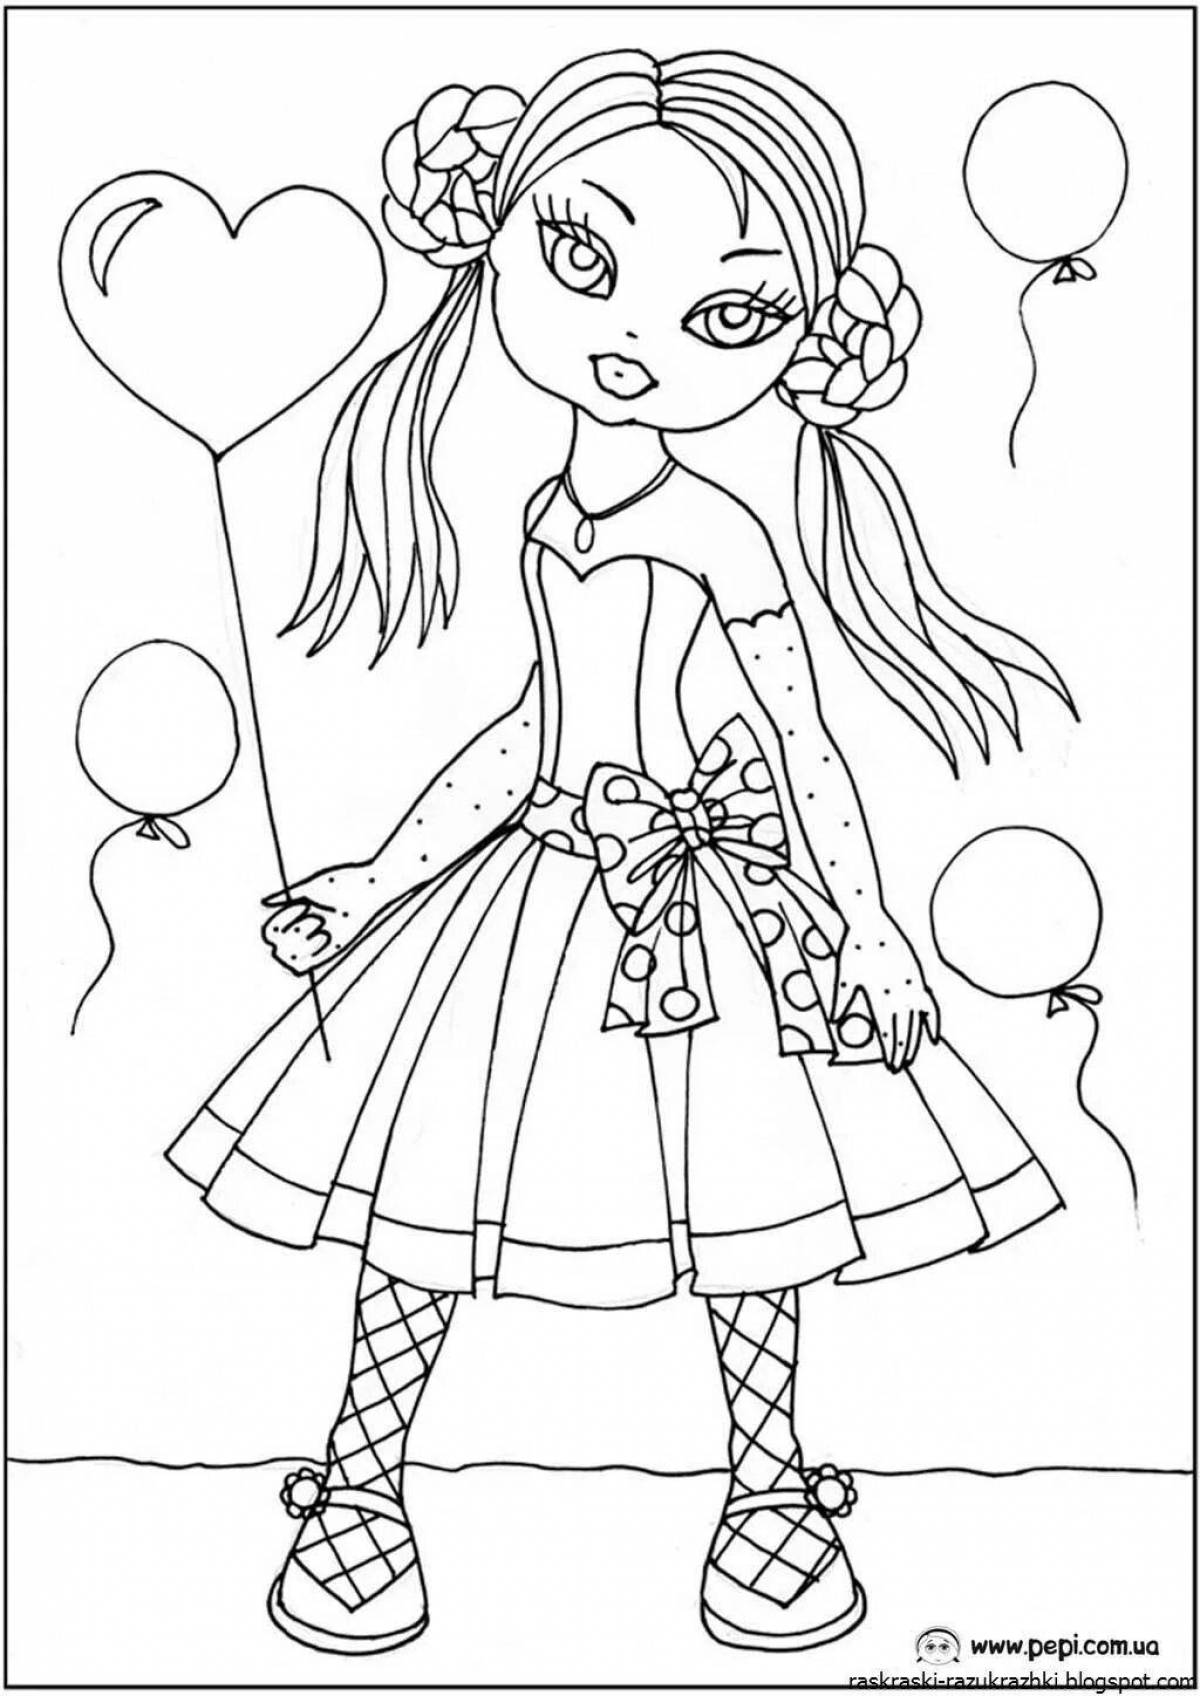 Playful coloring book for doll girls